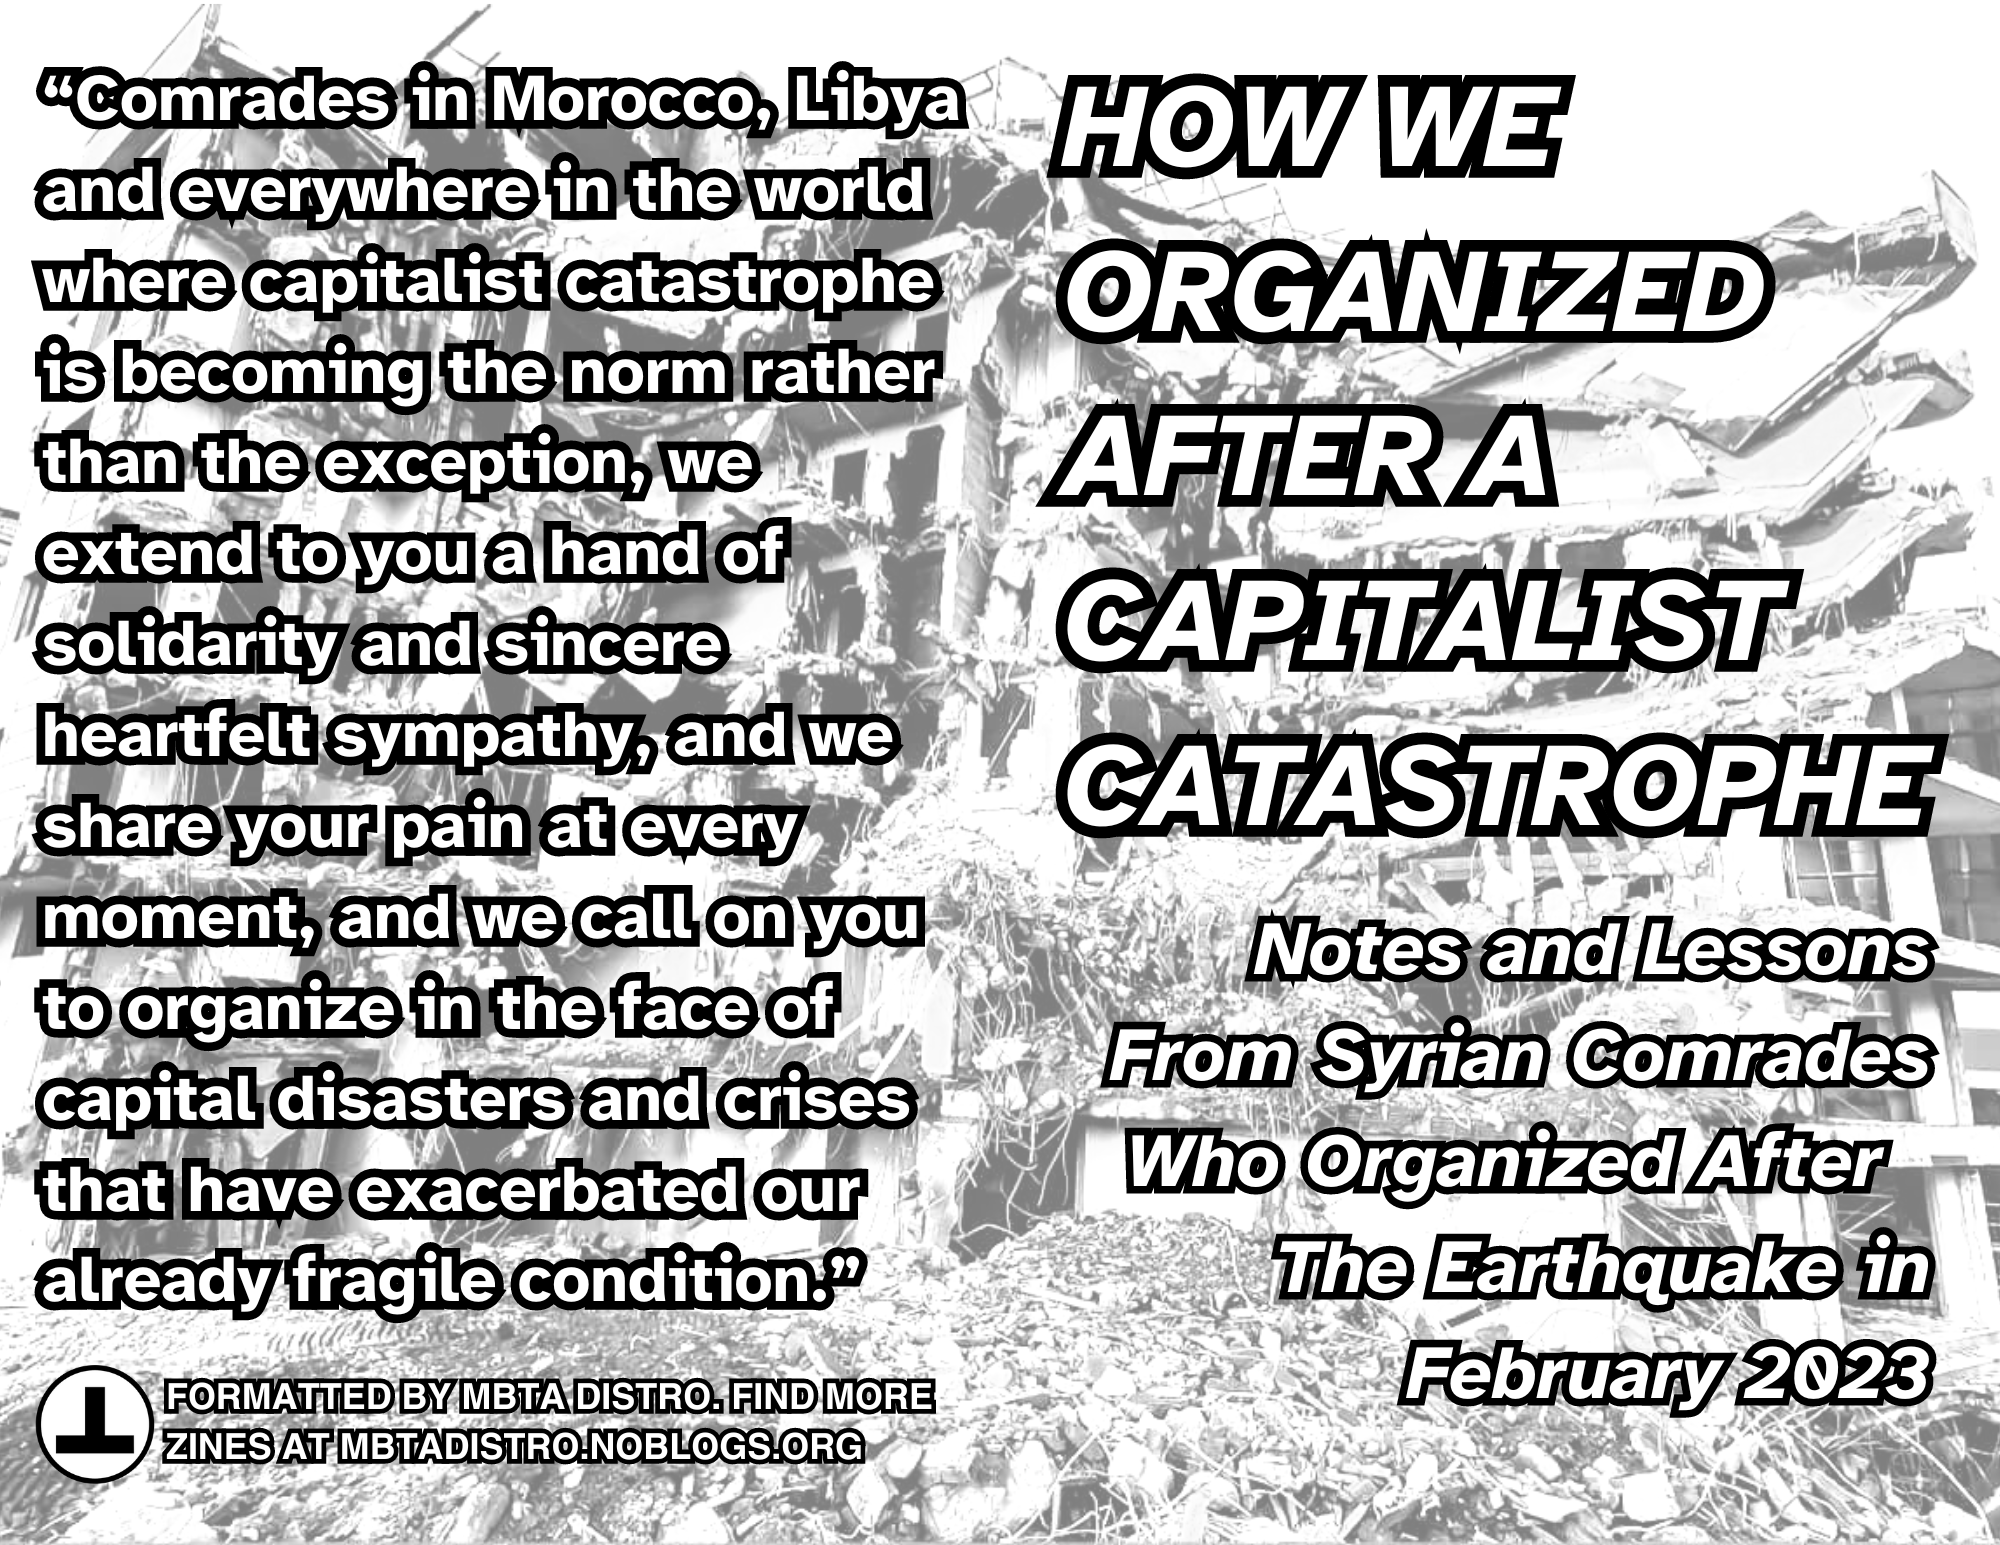 A black and white cover of a zine. Text is white with a black outline. The cover reads "How we organized after a capitalist catastrophe: Notes and Lessons From Syrian Comrades Who Organized After The Earthquake in February 2023" The background is a black and white image of rubble and partially destroyed buildings.